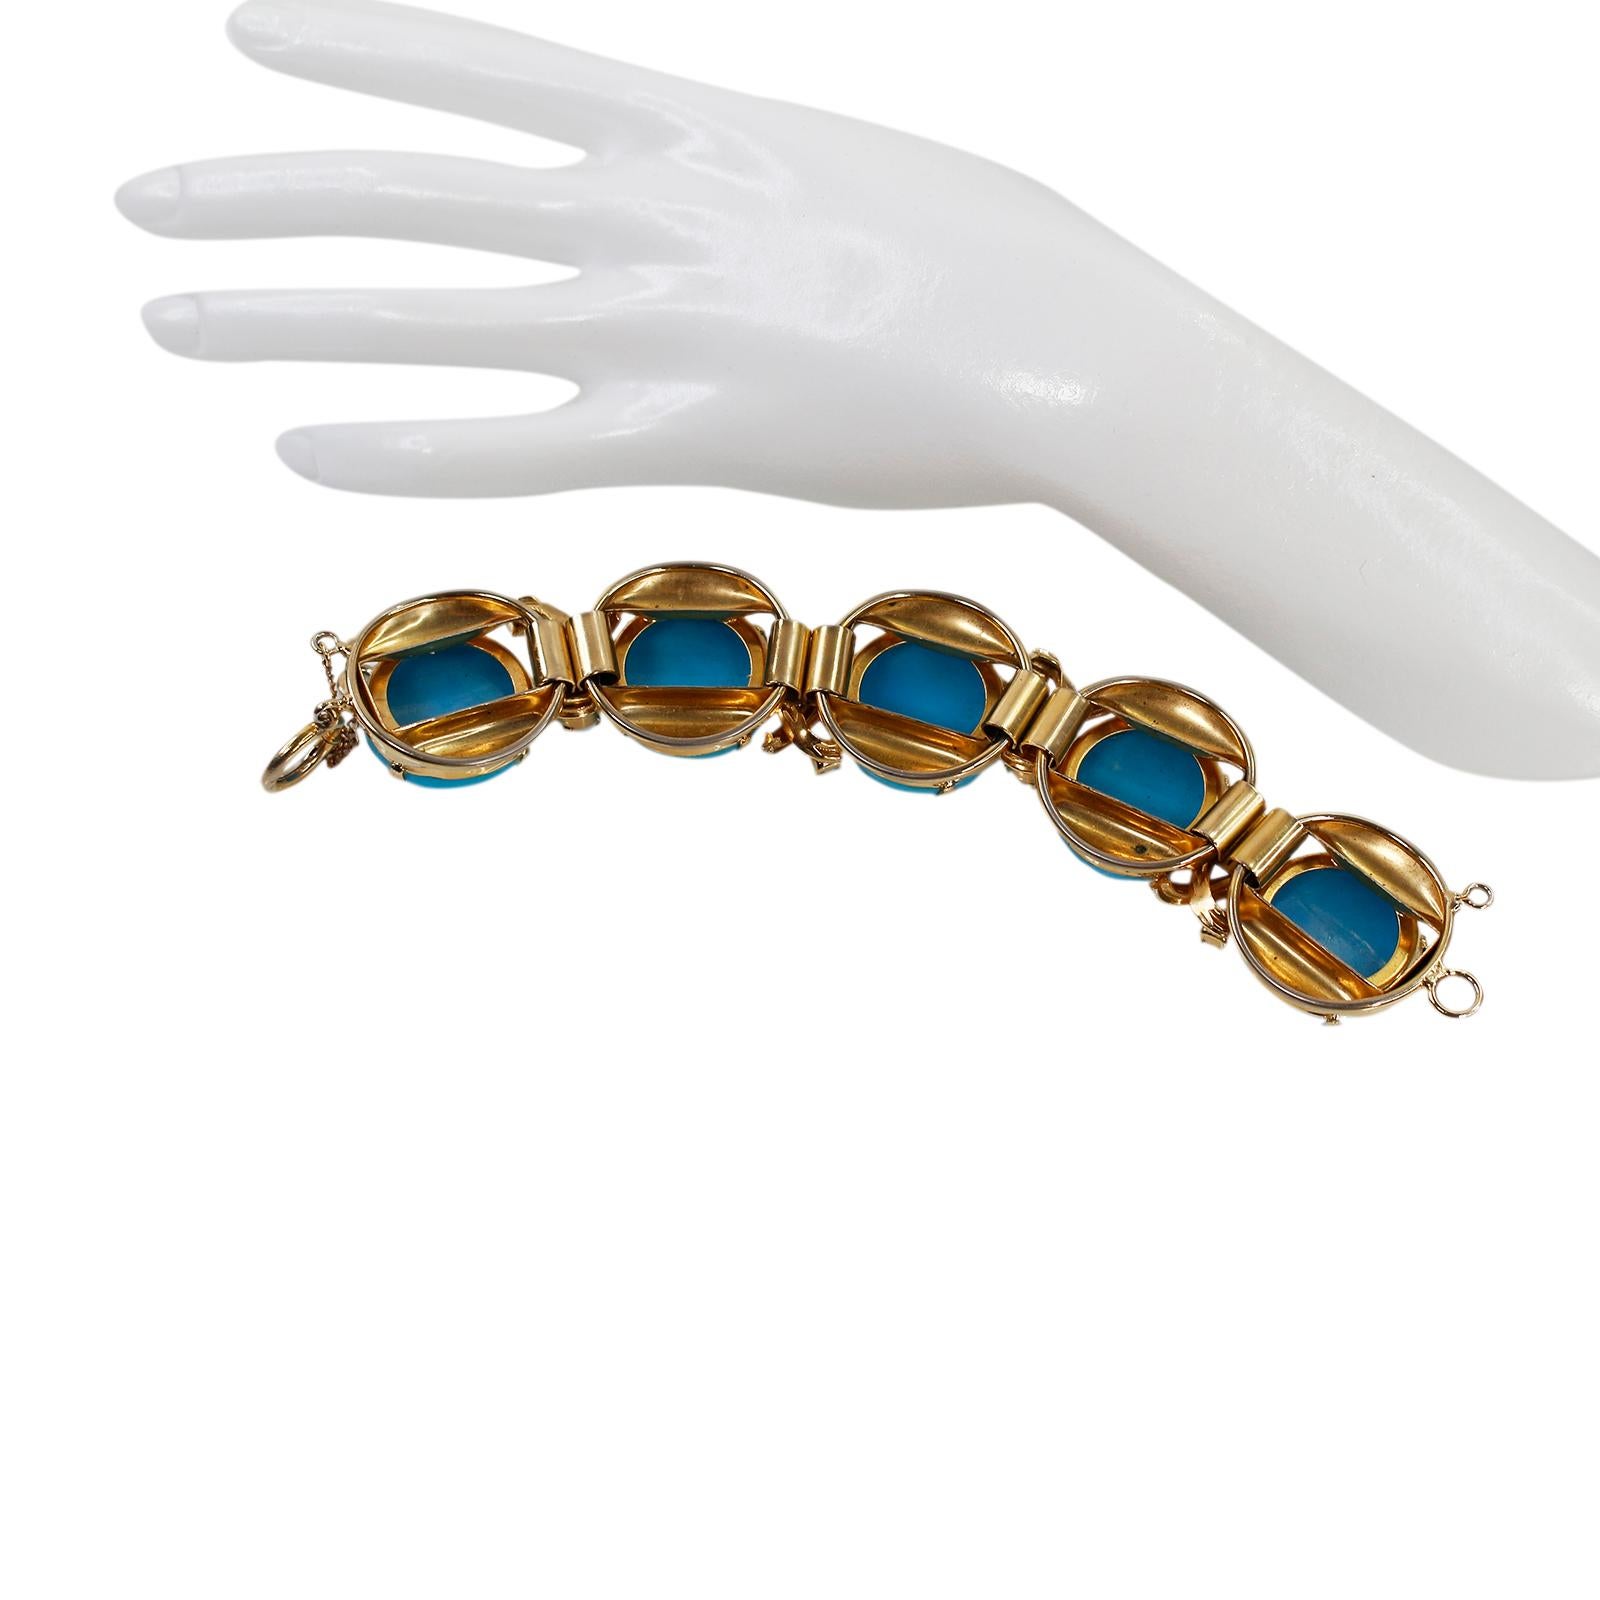 Vintage Unsigned Gold and Faux Turquoise Bracelet Circa 1960s For Sale 9